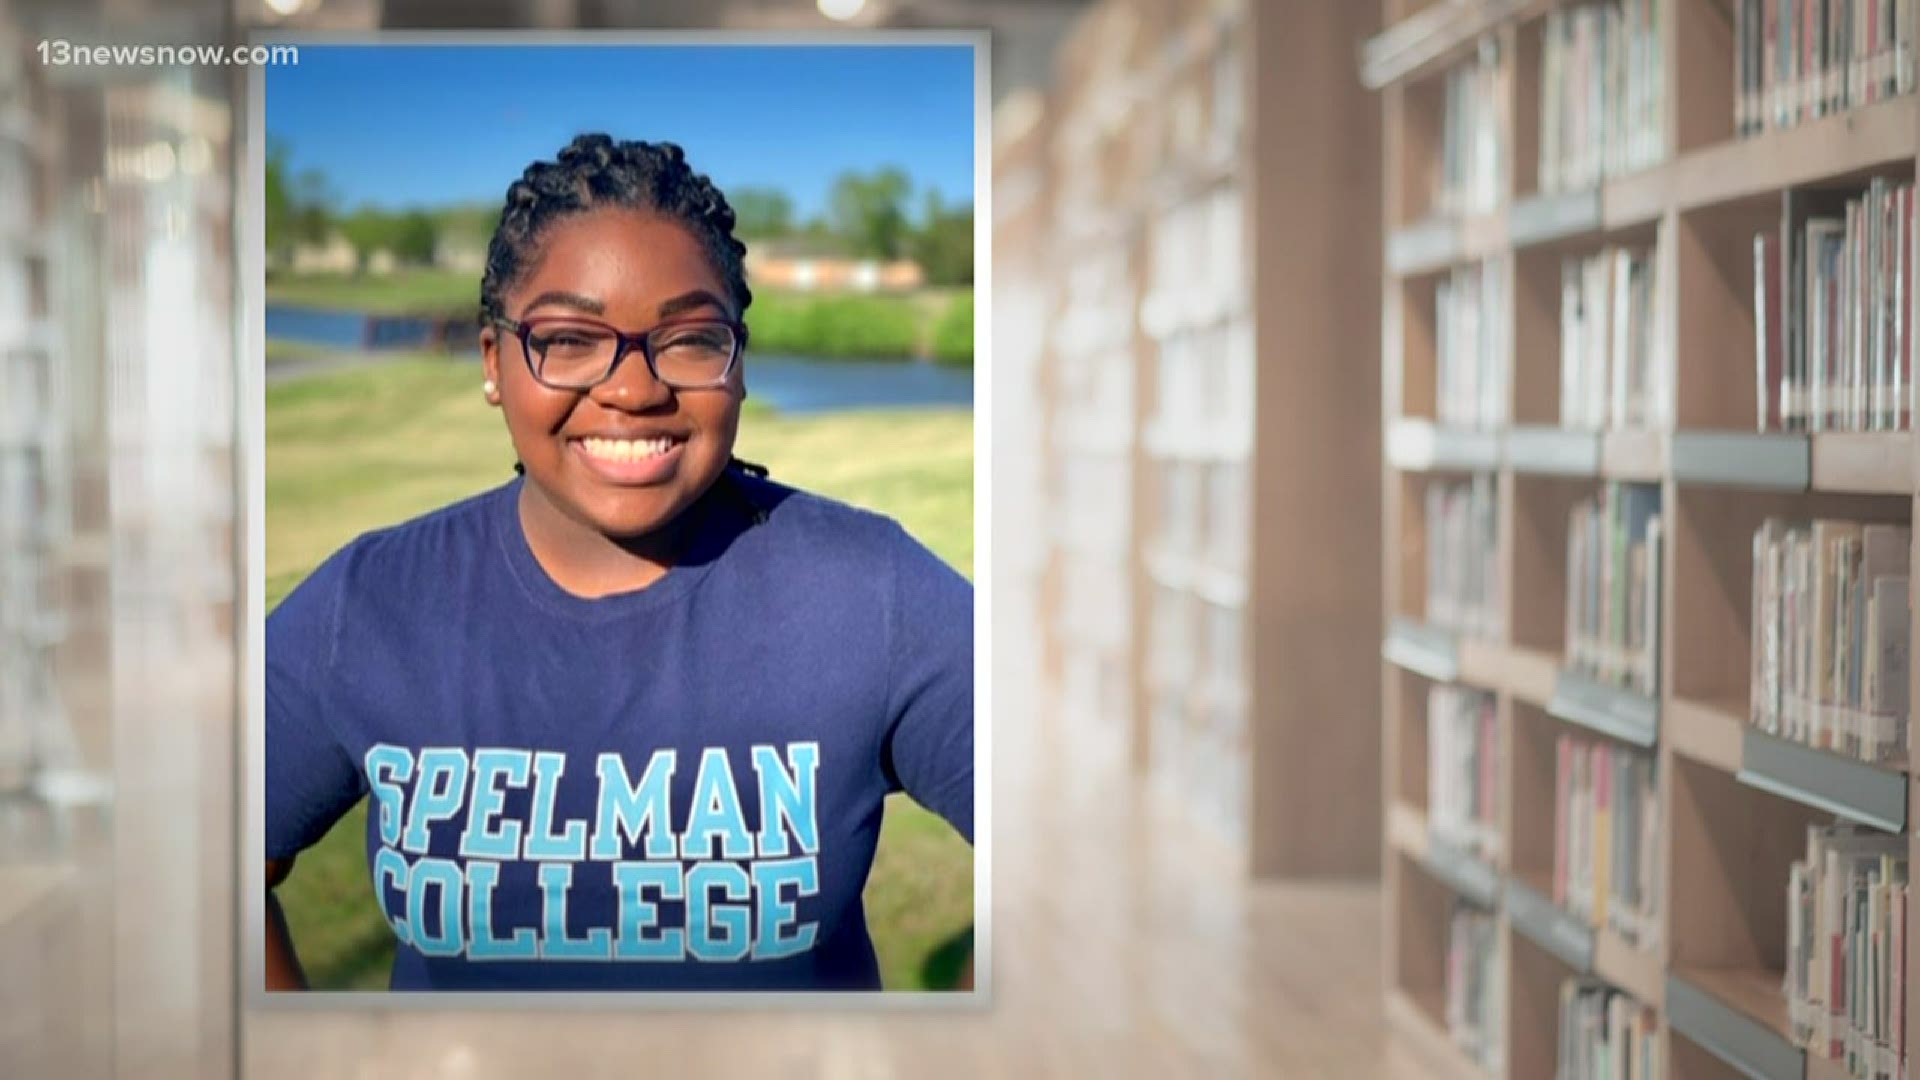 Jalyn White of Virginia Beach is a bright student who has been accepted to Spelman College. But the sudden loss of her mother's job will make it hard to afford.